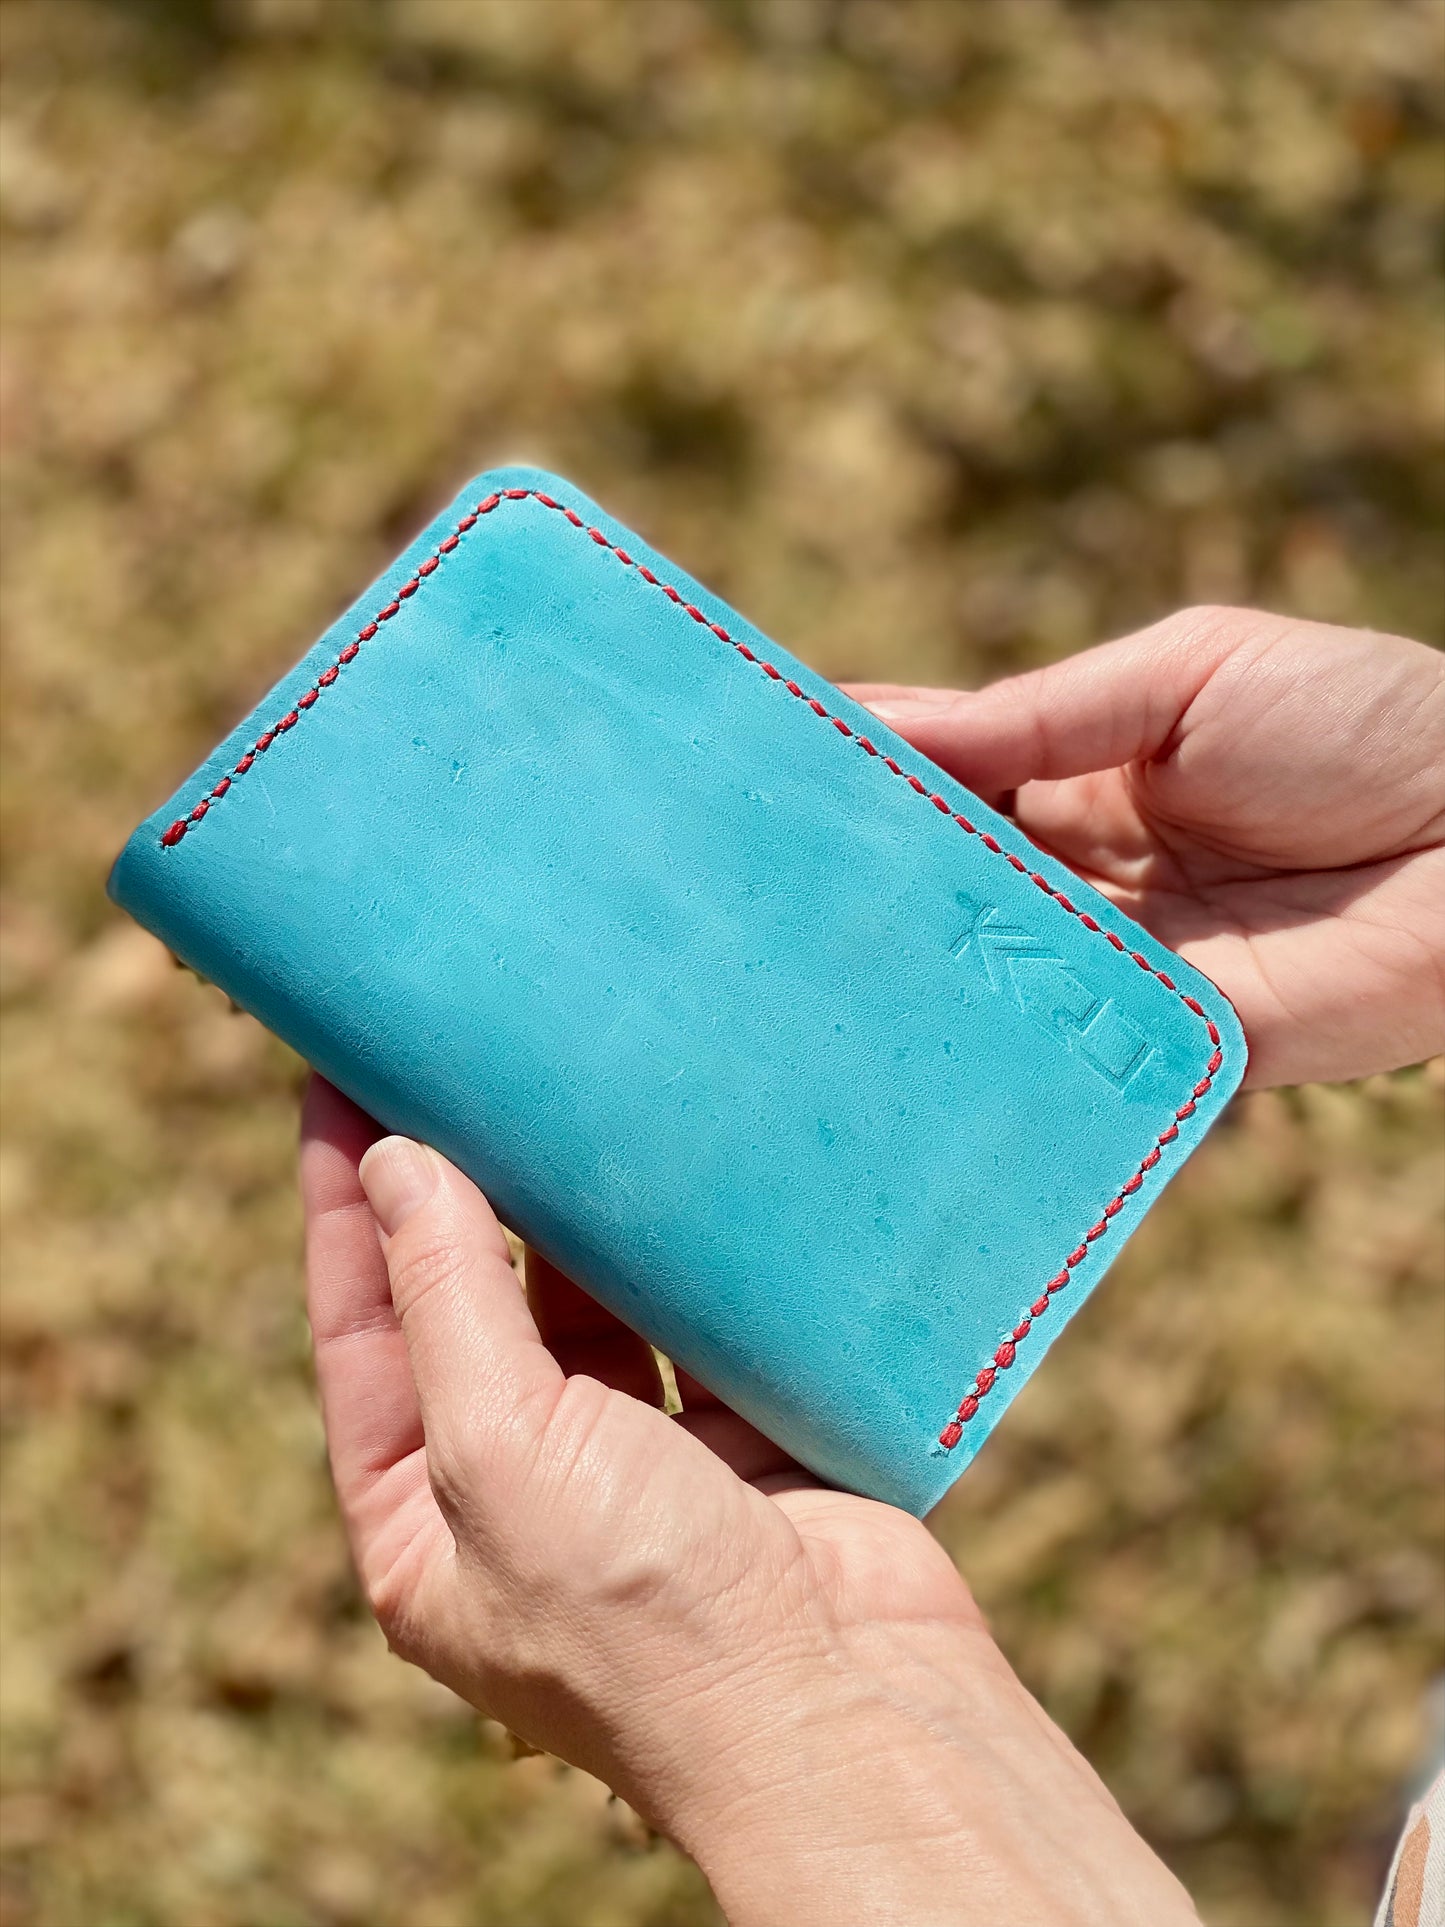 Kaiju Cut and Sew Field Notes/Passport Cover with Credit Card Pocket | Baby Blue Horween Leather | Handmade in Austin, Texas